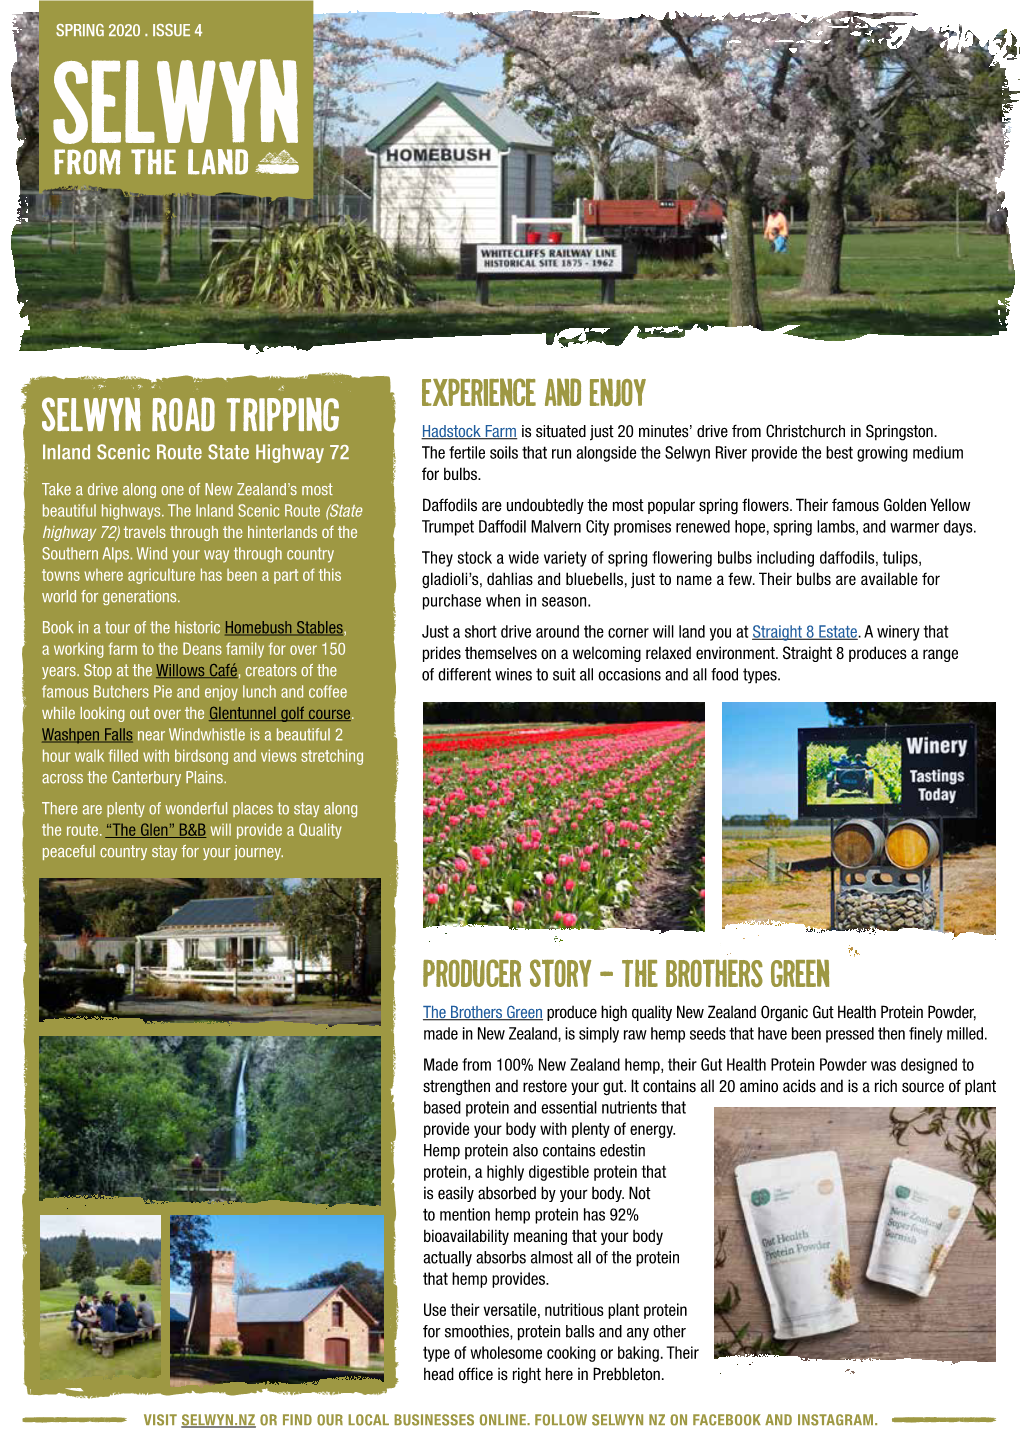 Selwyn Road Tripping Hadstock Farm Is Situated Just 20 Minutes’ Drive from Christchurch in Springston